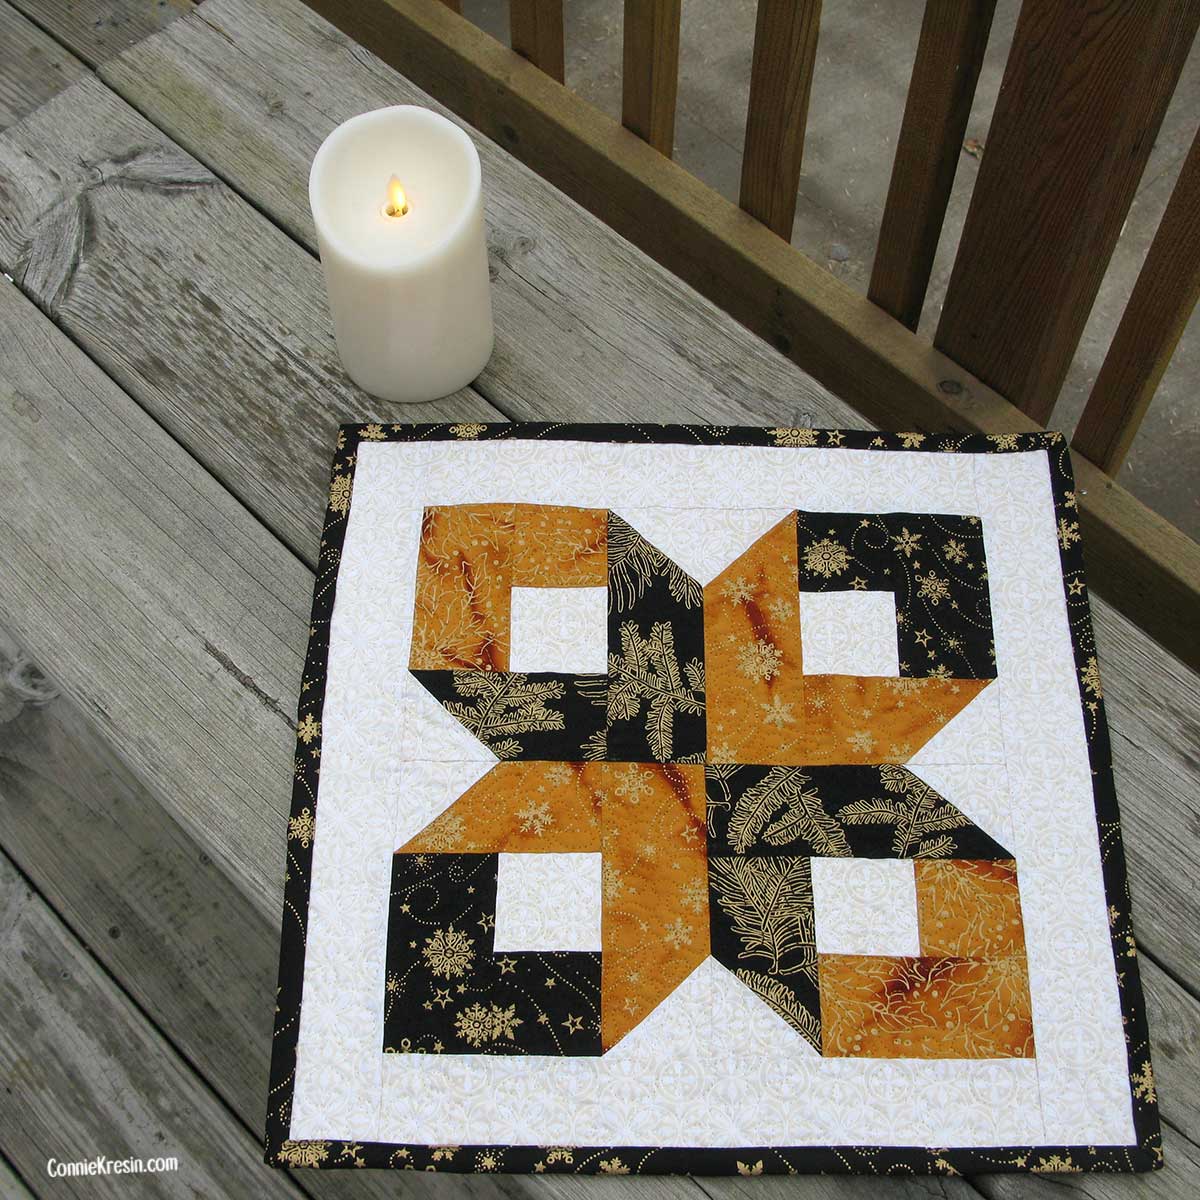 Silent Night Center piece made with the Box quilt block